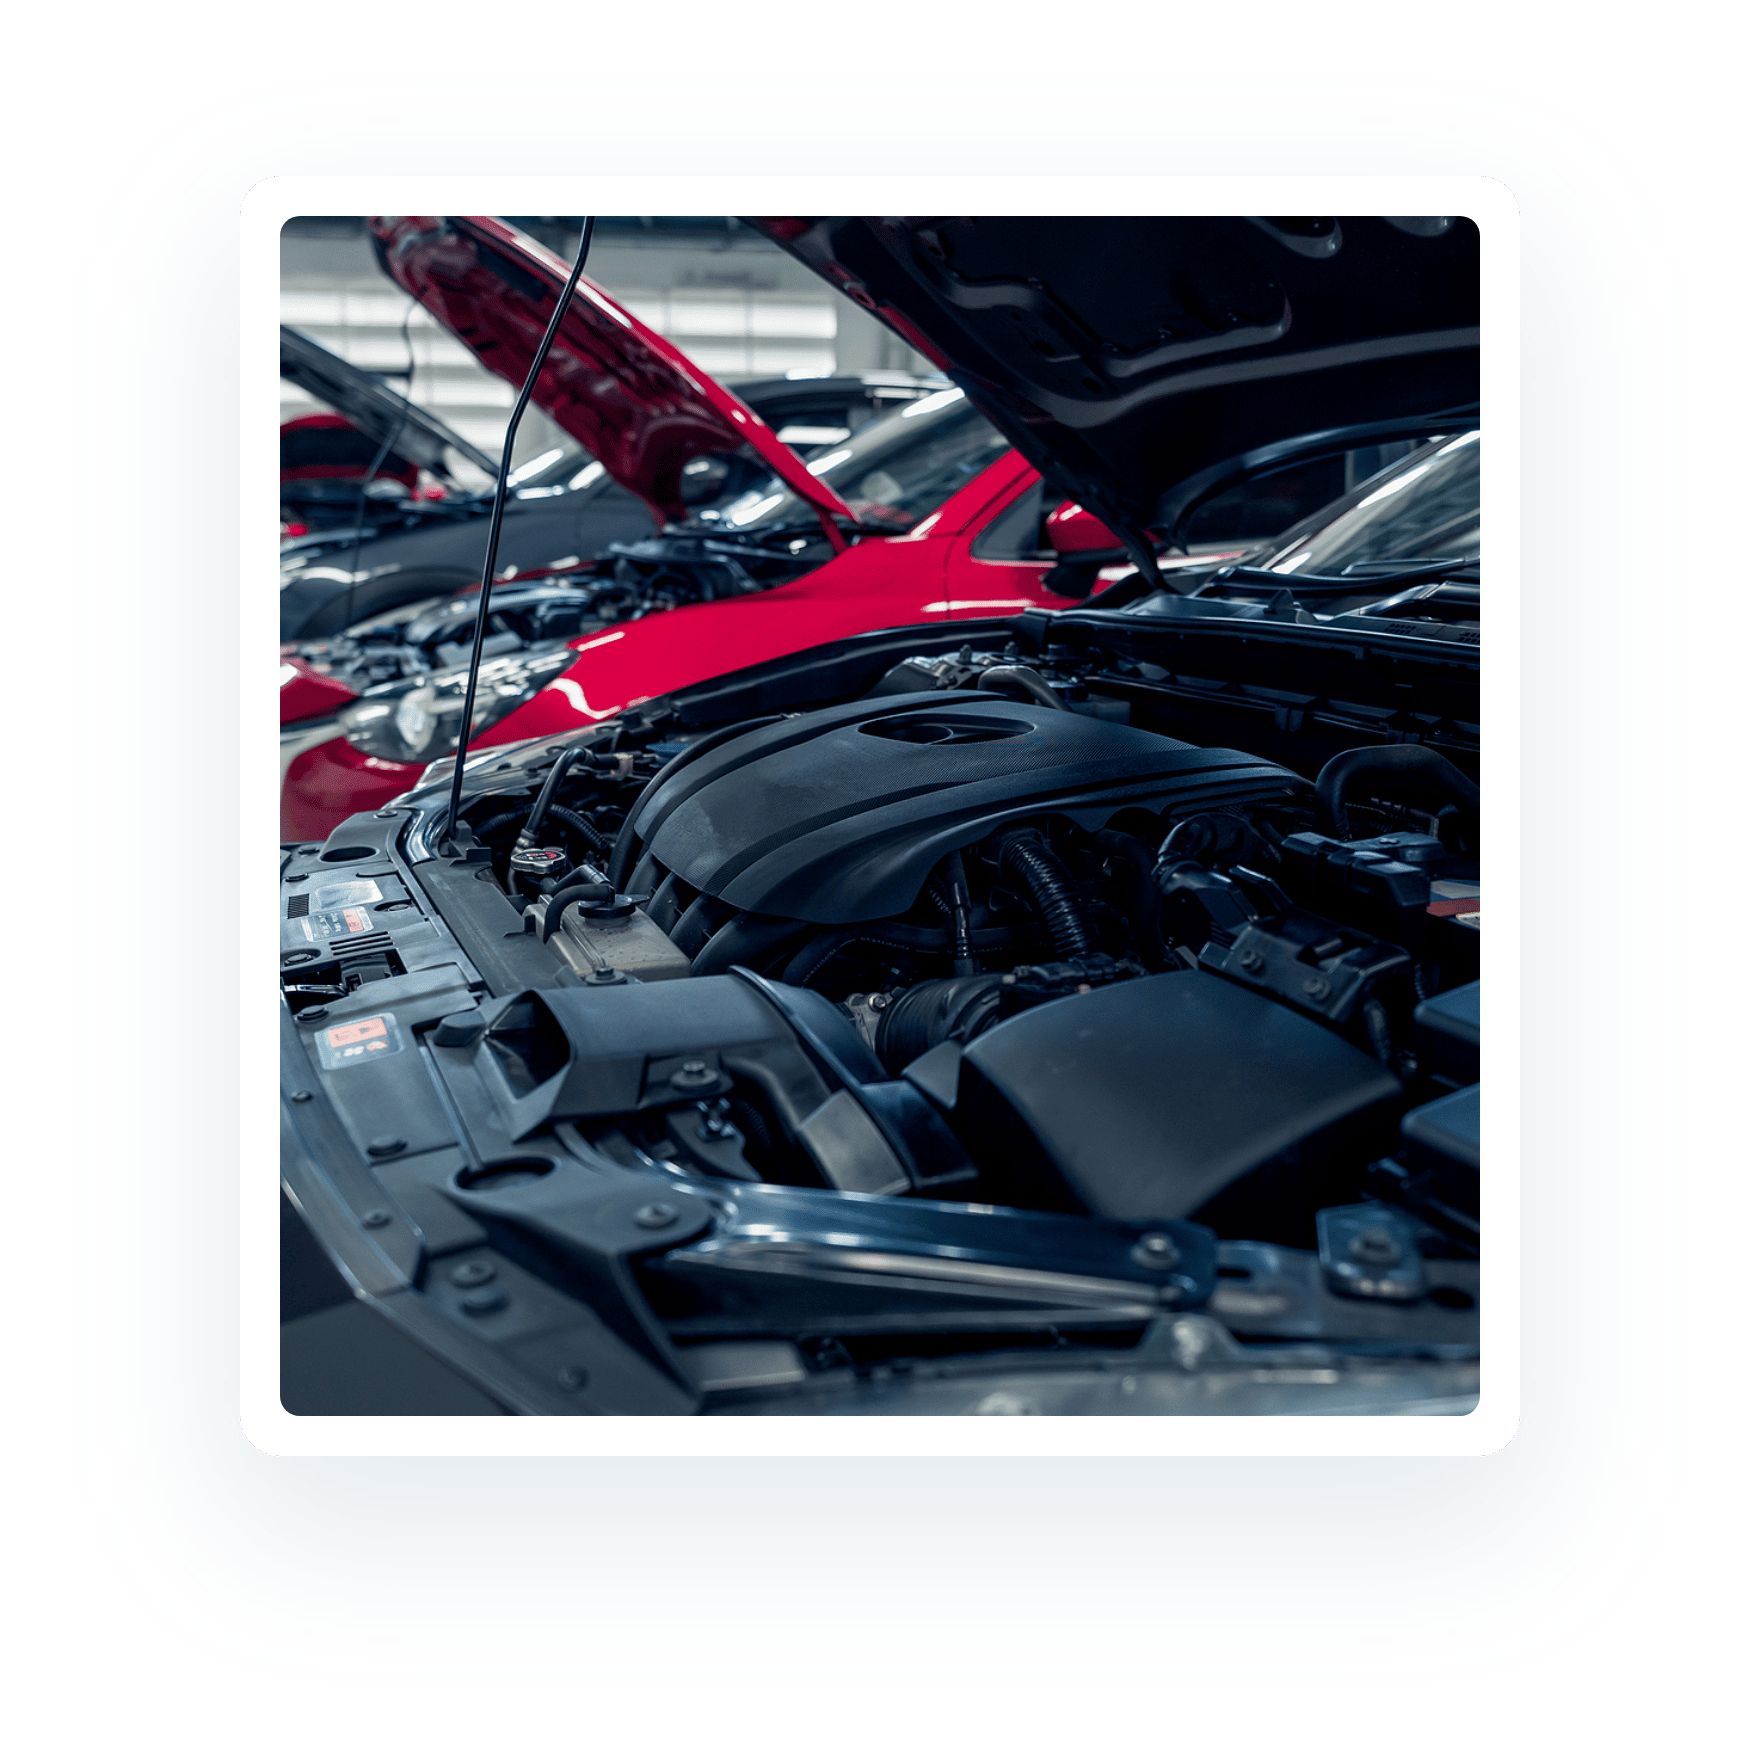 Image of cars with hoods up with exposed engines and other interior components. Concept image of engine services and repair at Quality Car Care in North Liberty, IA.